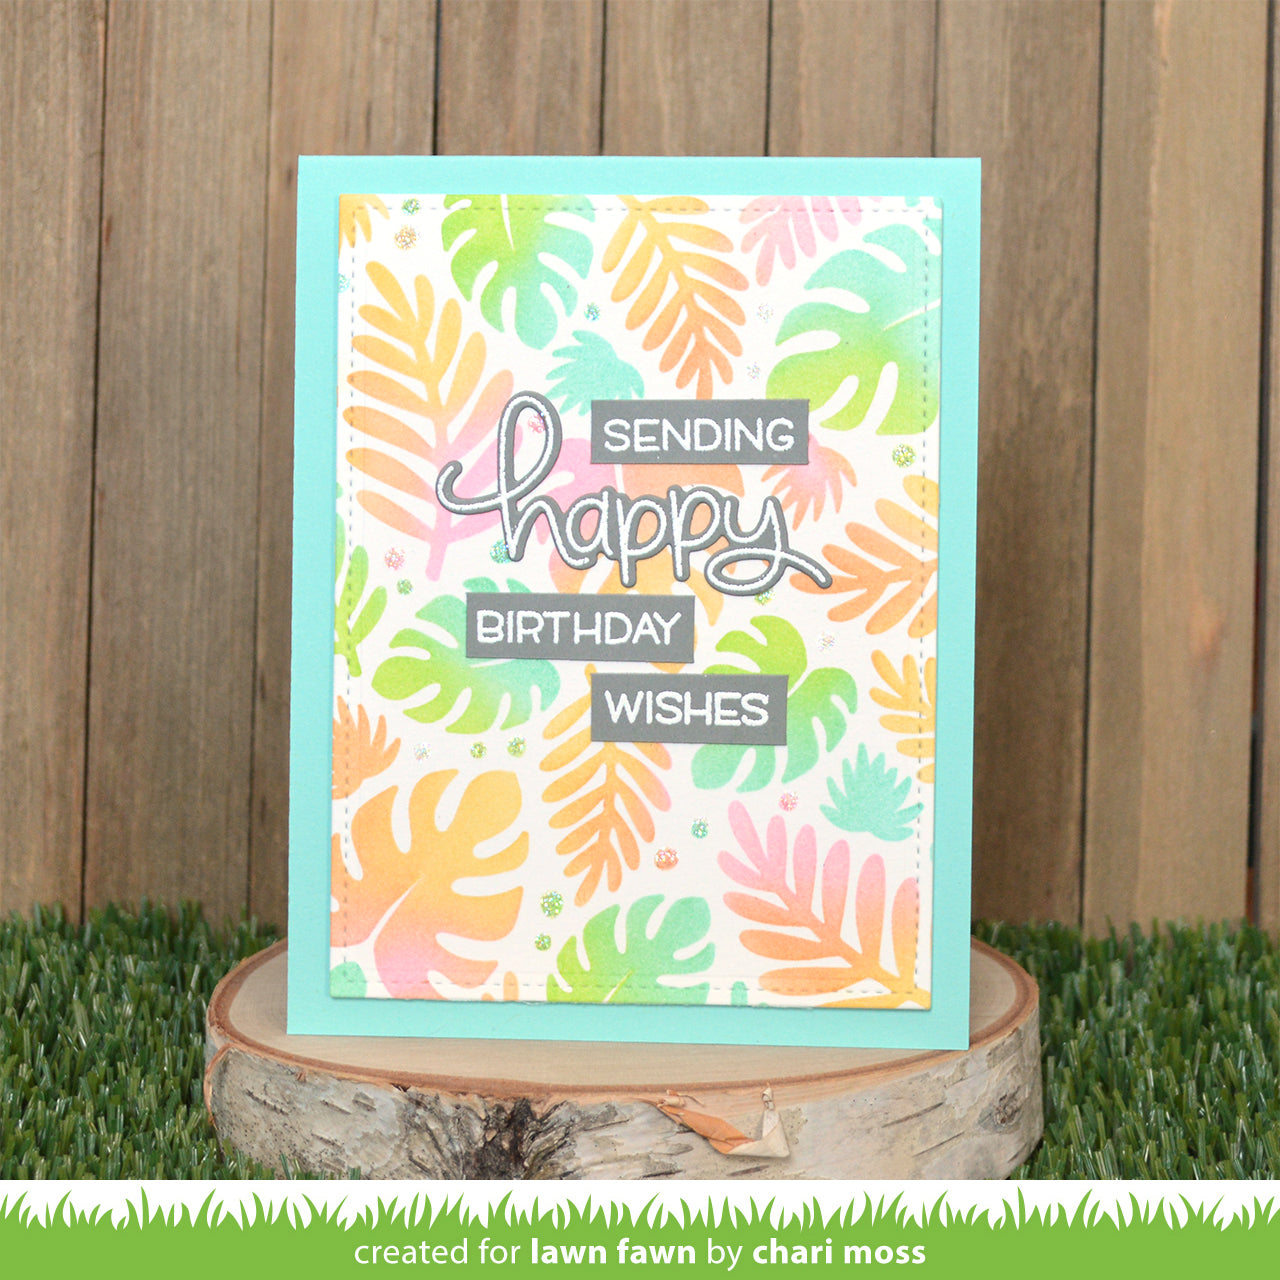 tropical leaves background stencils